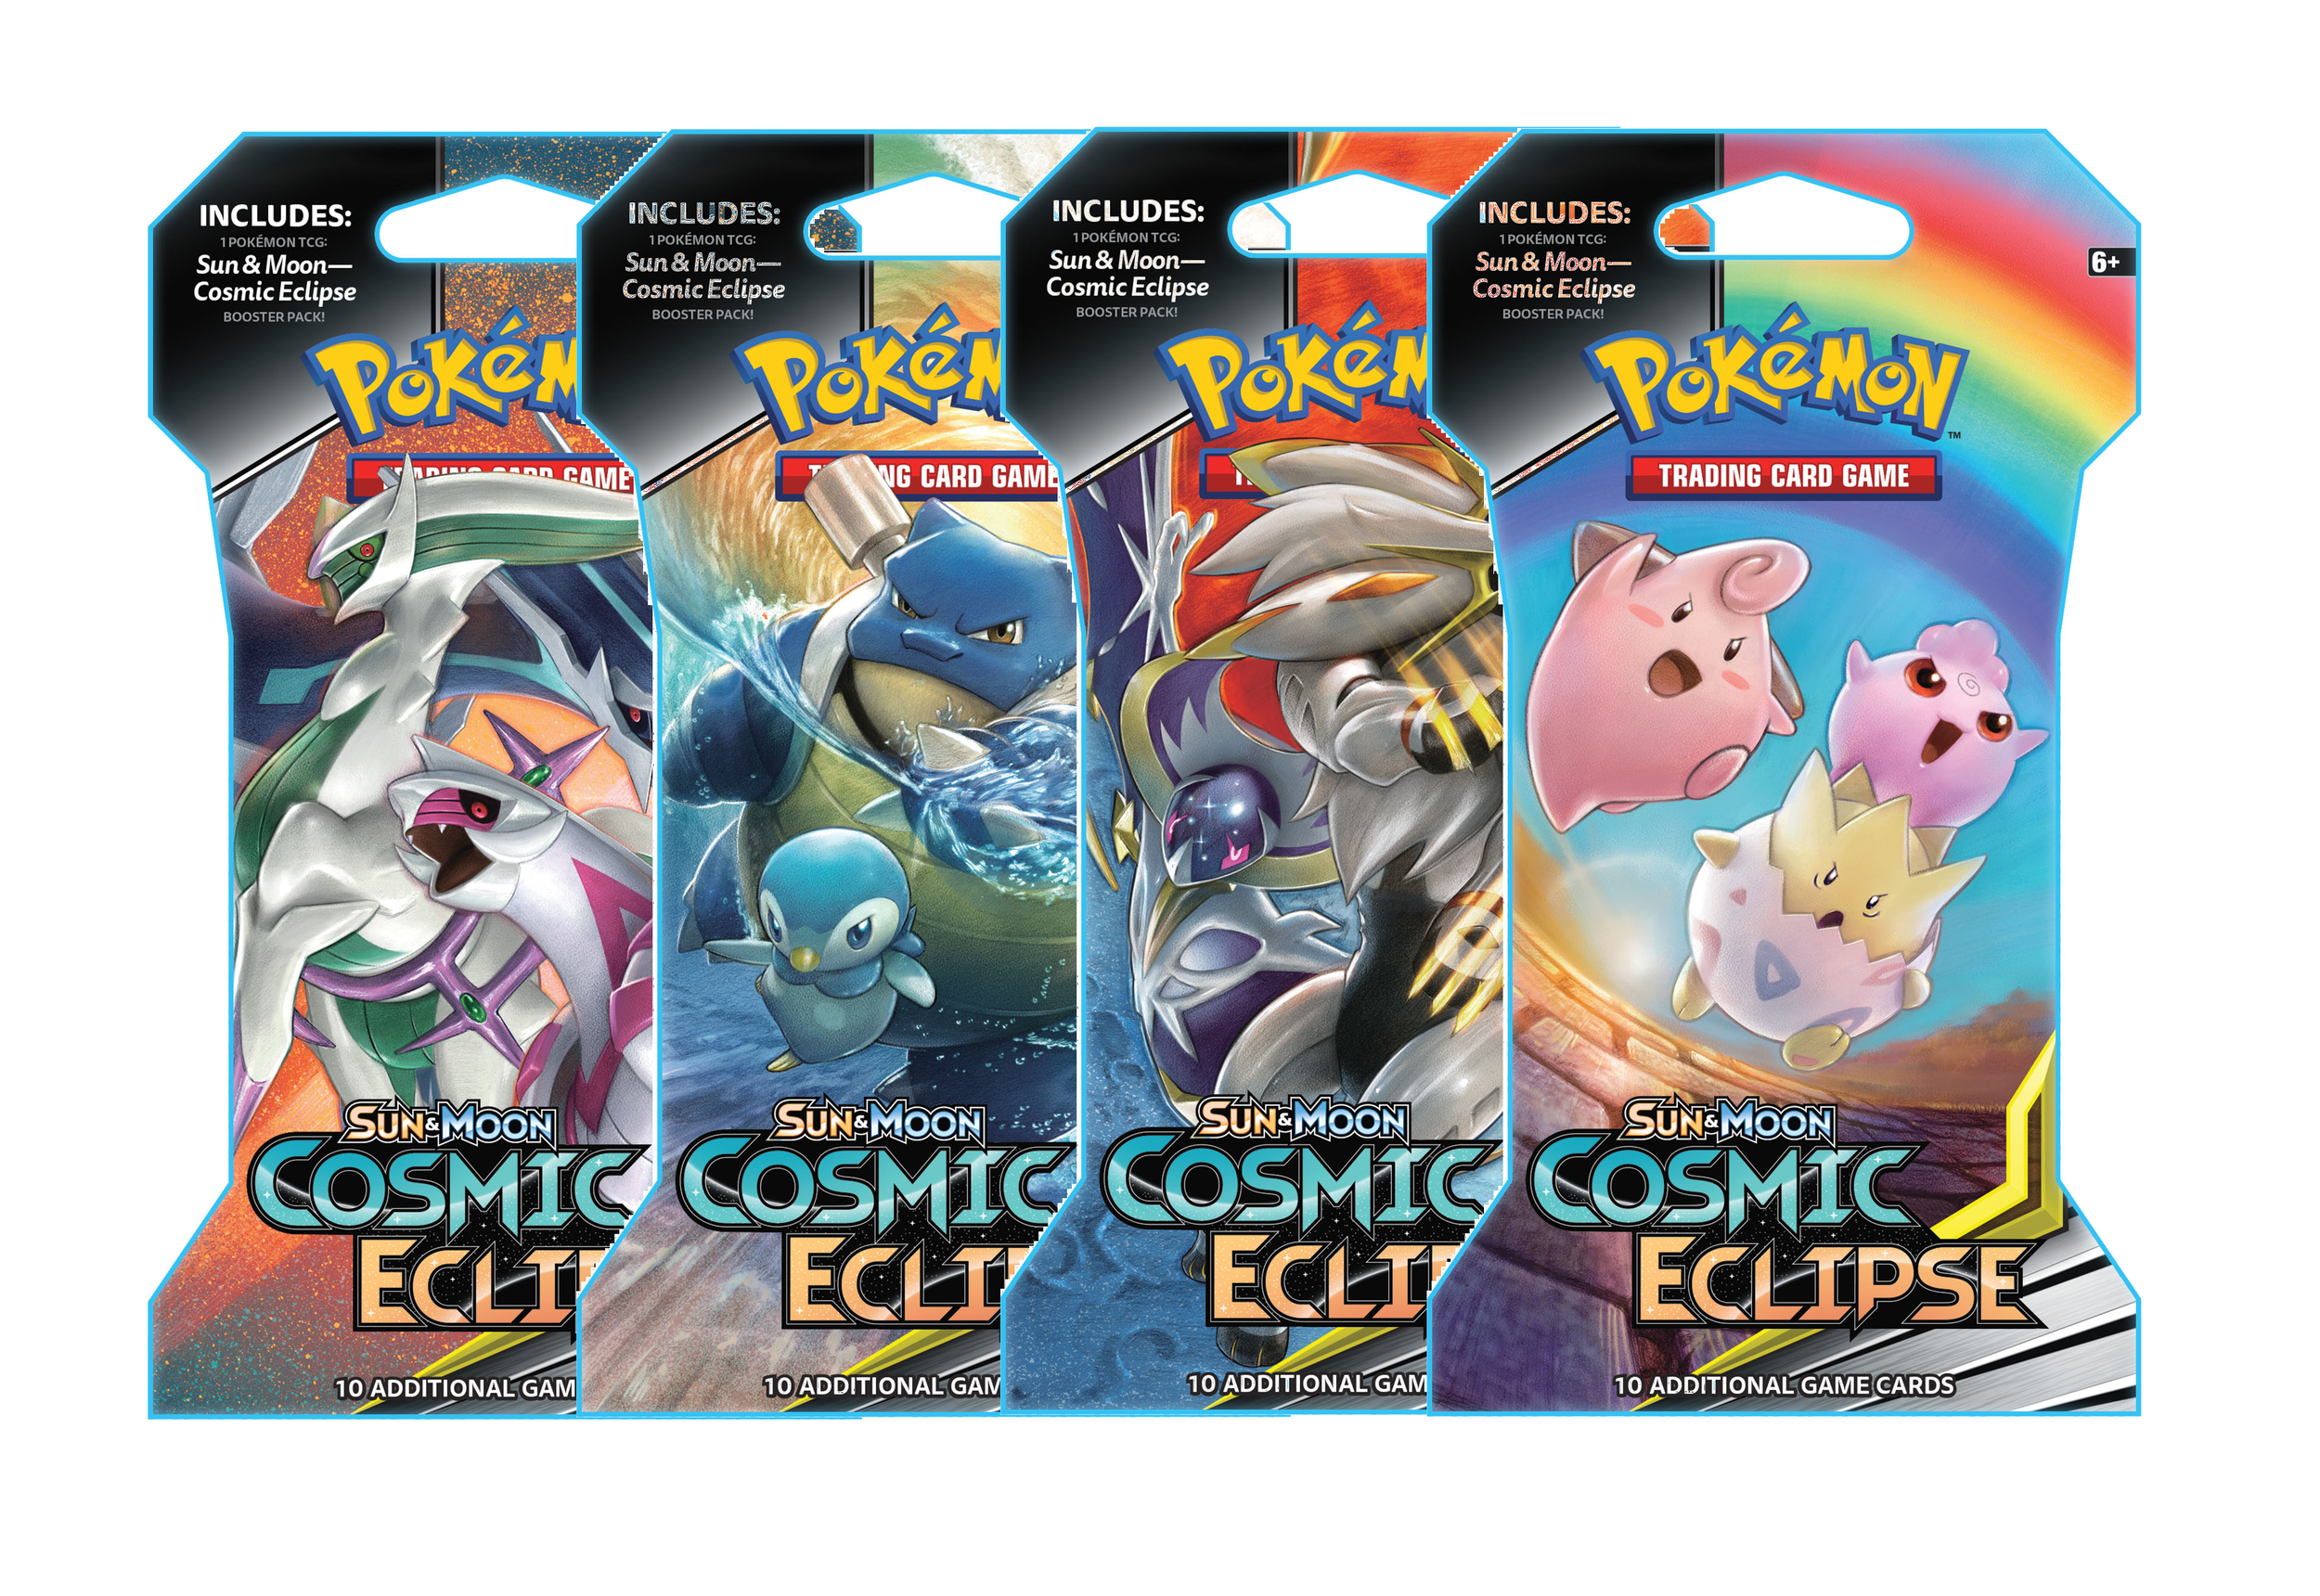 Cosmic Eclipse Sleeved Booster Packs & Cases